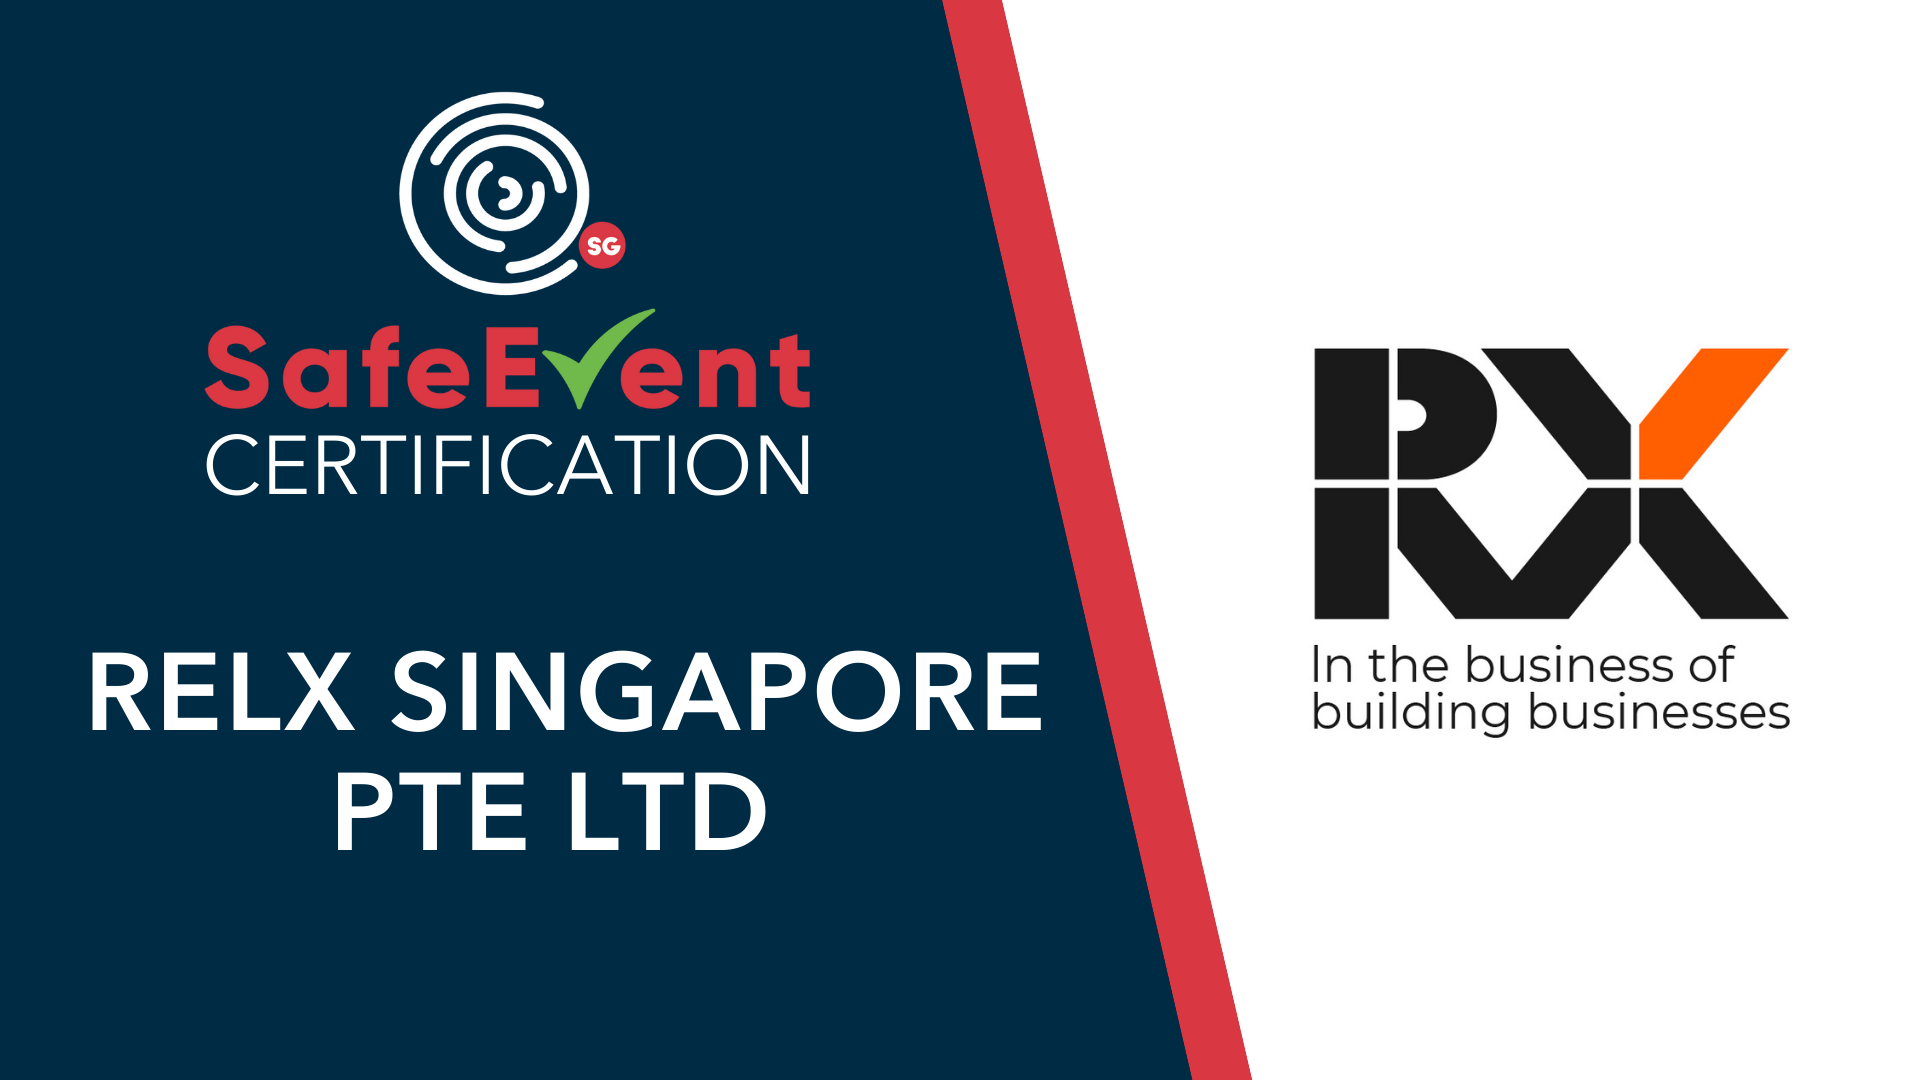 SG SafeEvent Certification: Yip Je Choong, Managing Director of Relx Singapore Pte Ltd